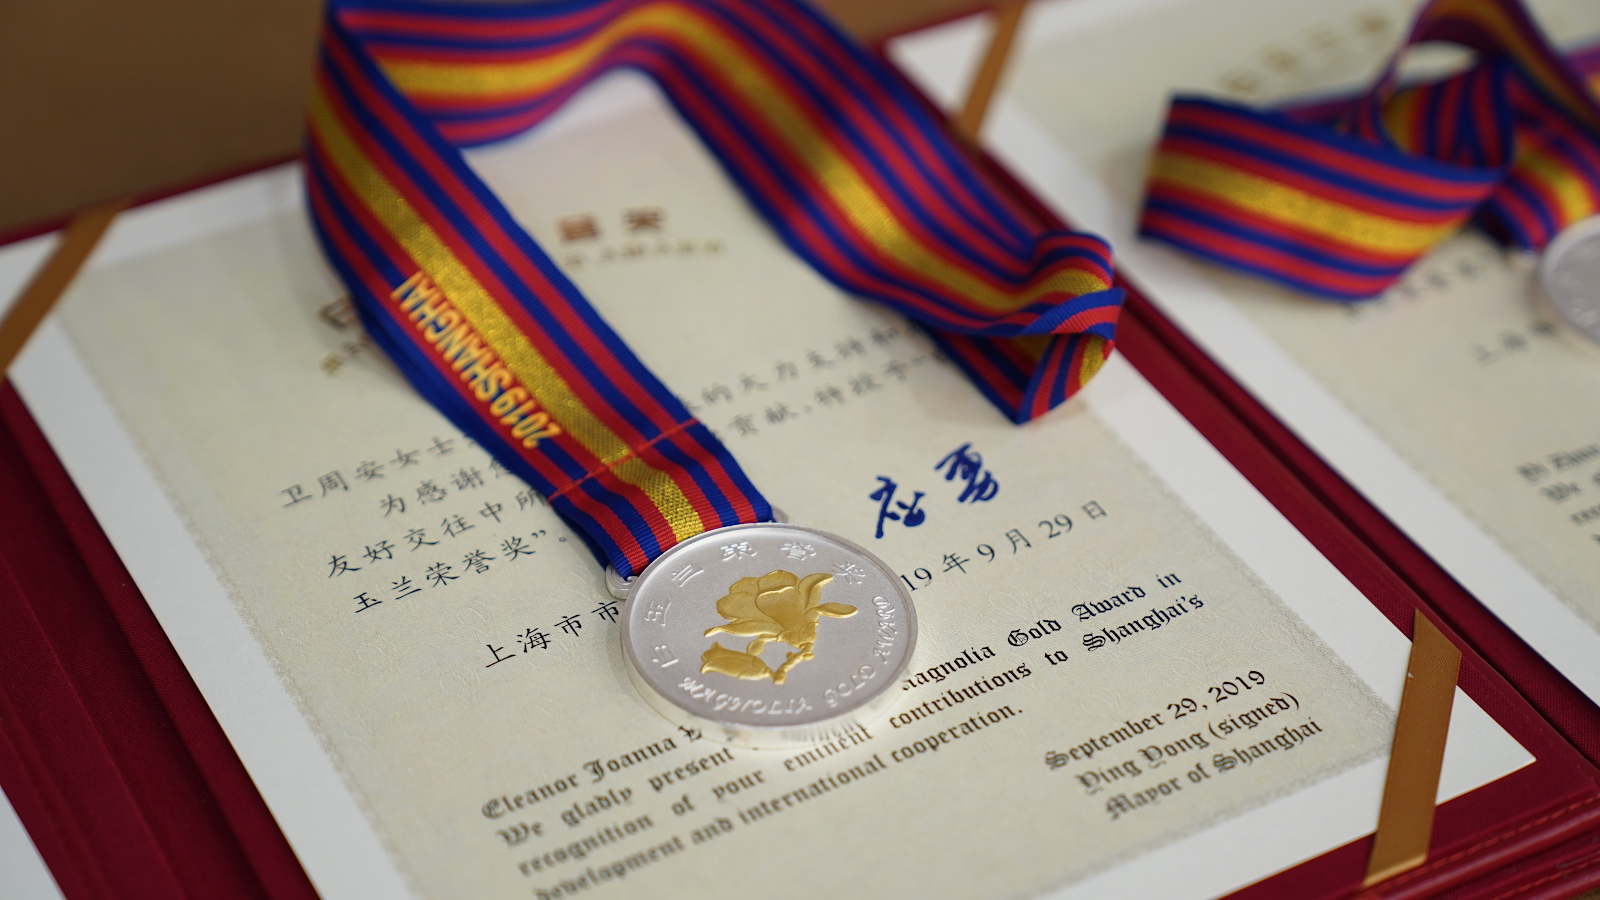 Joanna Waley-Cohen’s award certificate and medal of Gold Magnolia Award